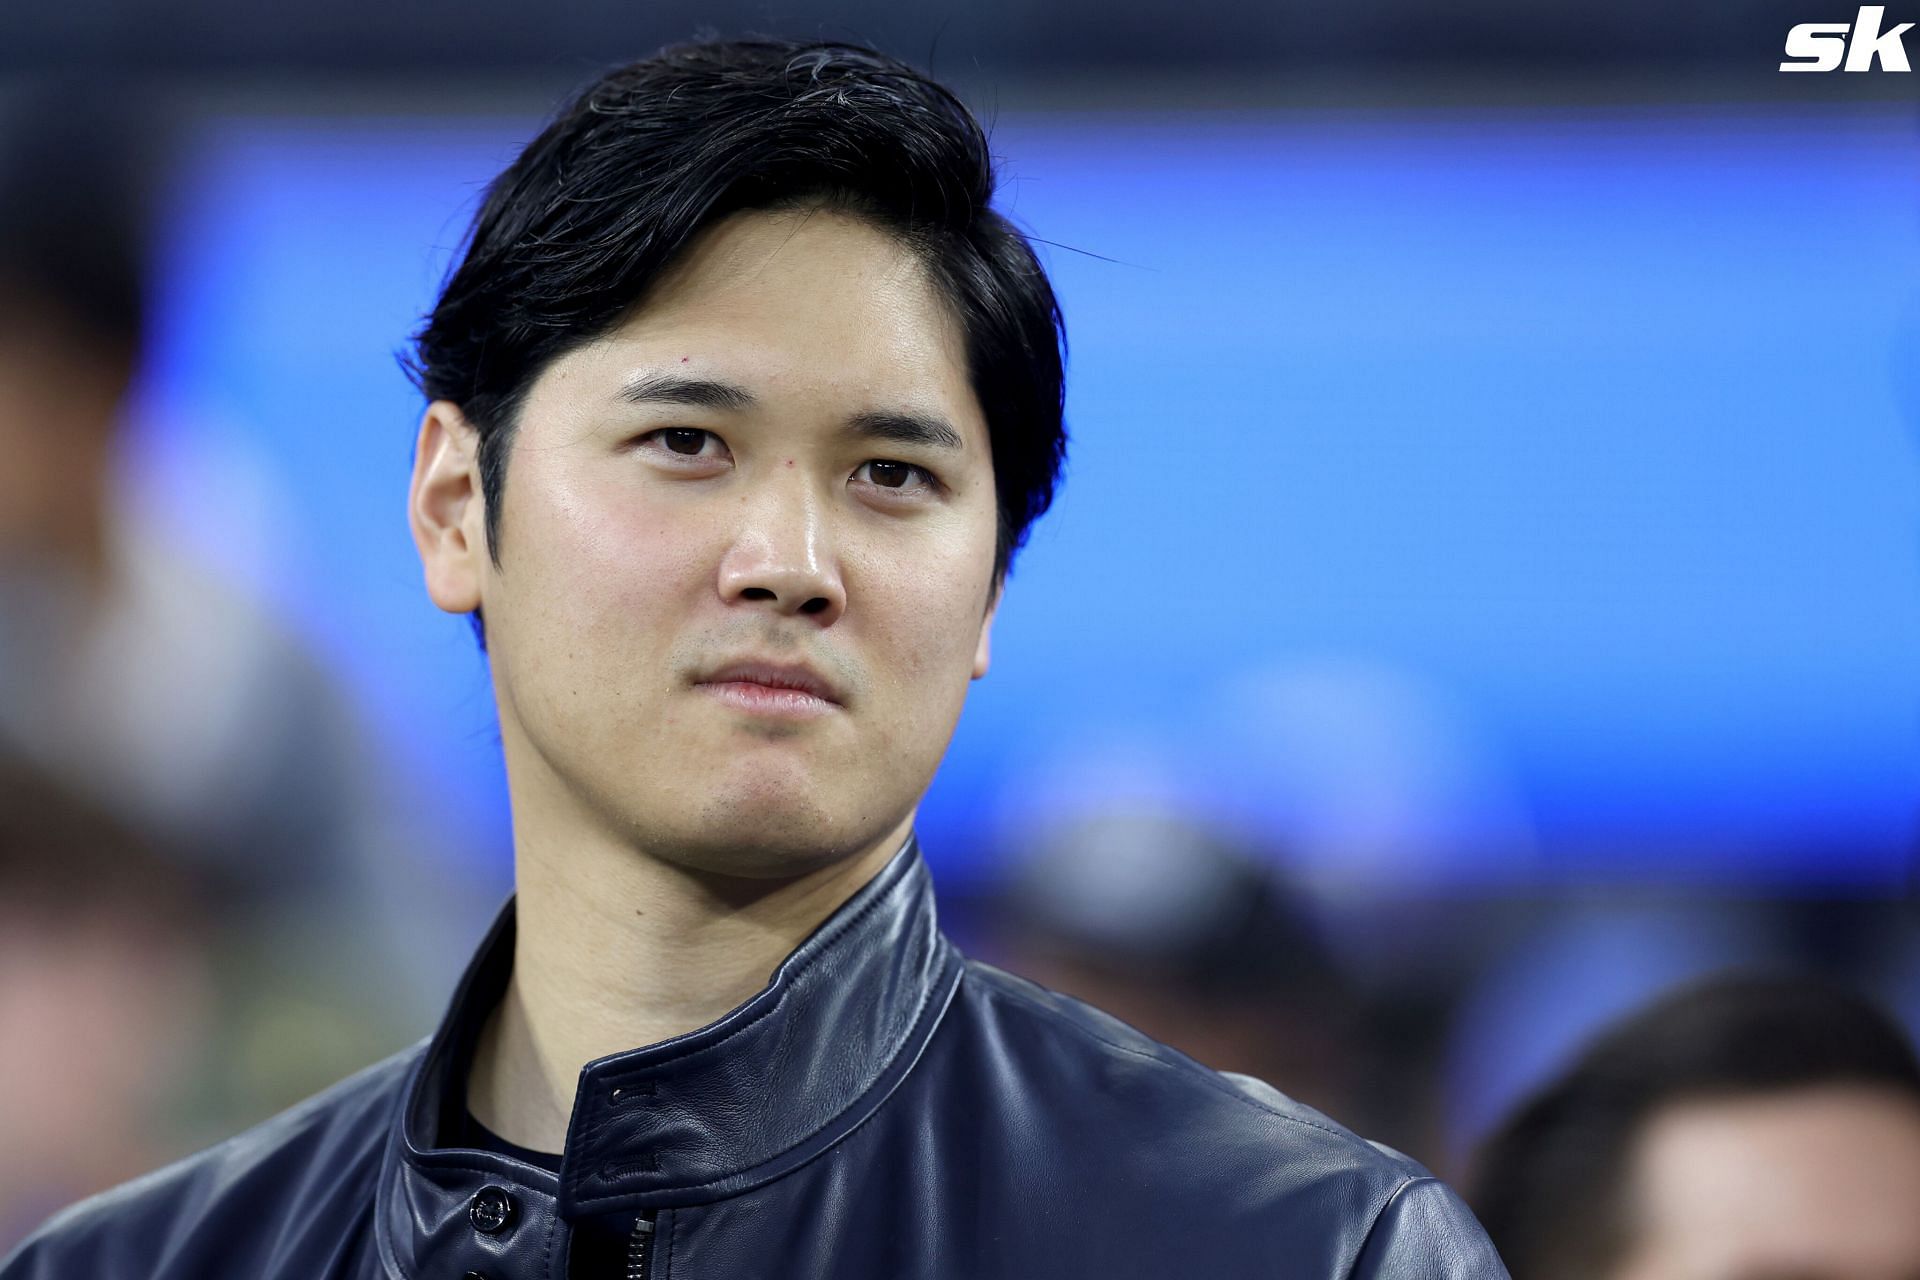 Shohei Ohtani embraces consequences of being a baseball player in documentary